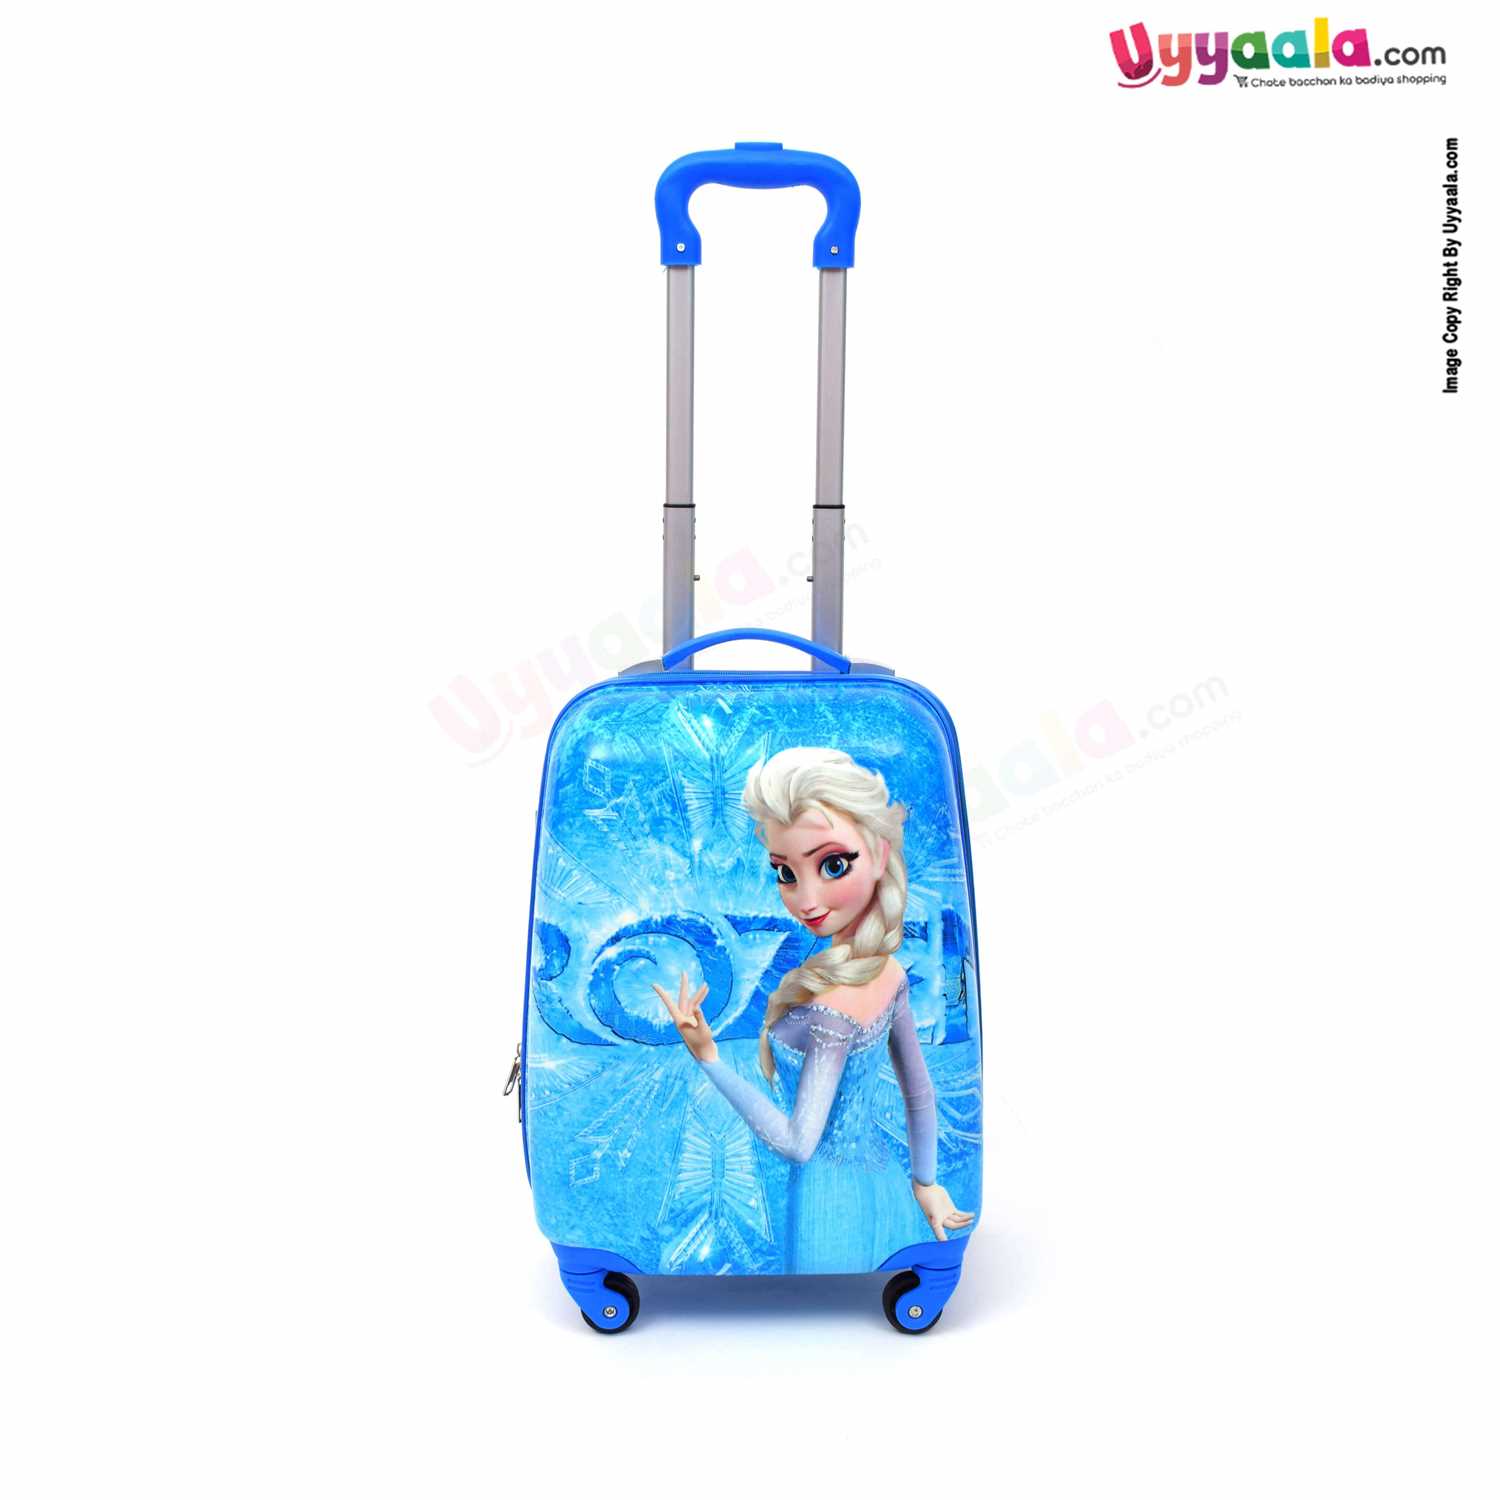 Travel Trolley Bag for Kids with Frozen Print 18 Inches - Blue